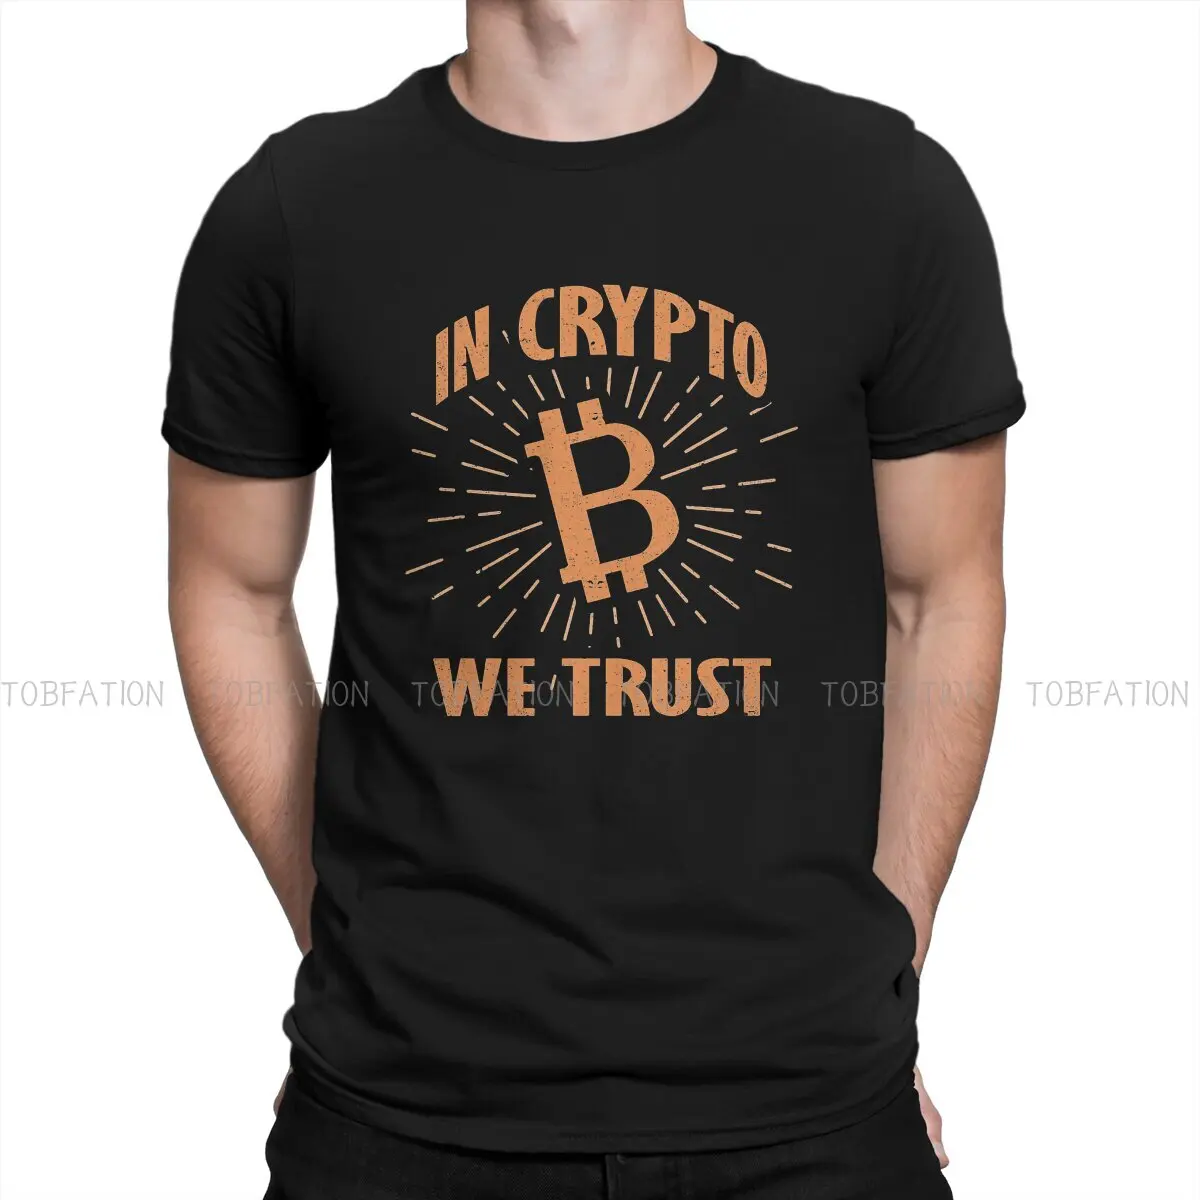 

In Crypto We Trust O Neck TShirt Bitcoin Cryptocurrency Miners Meme Polyester Original T Shirt Man's Tops Fashion Big Sale